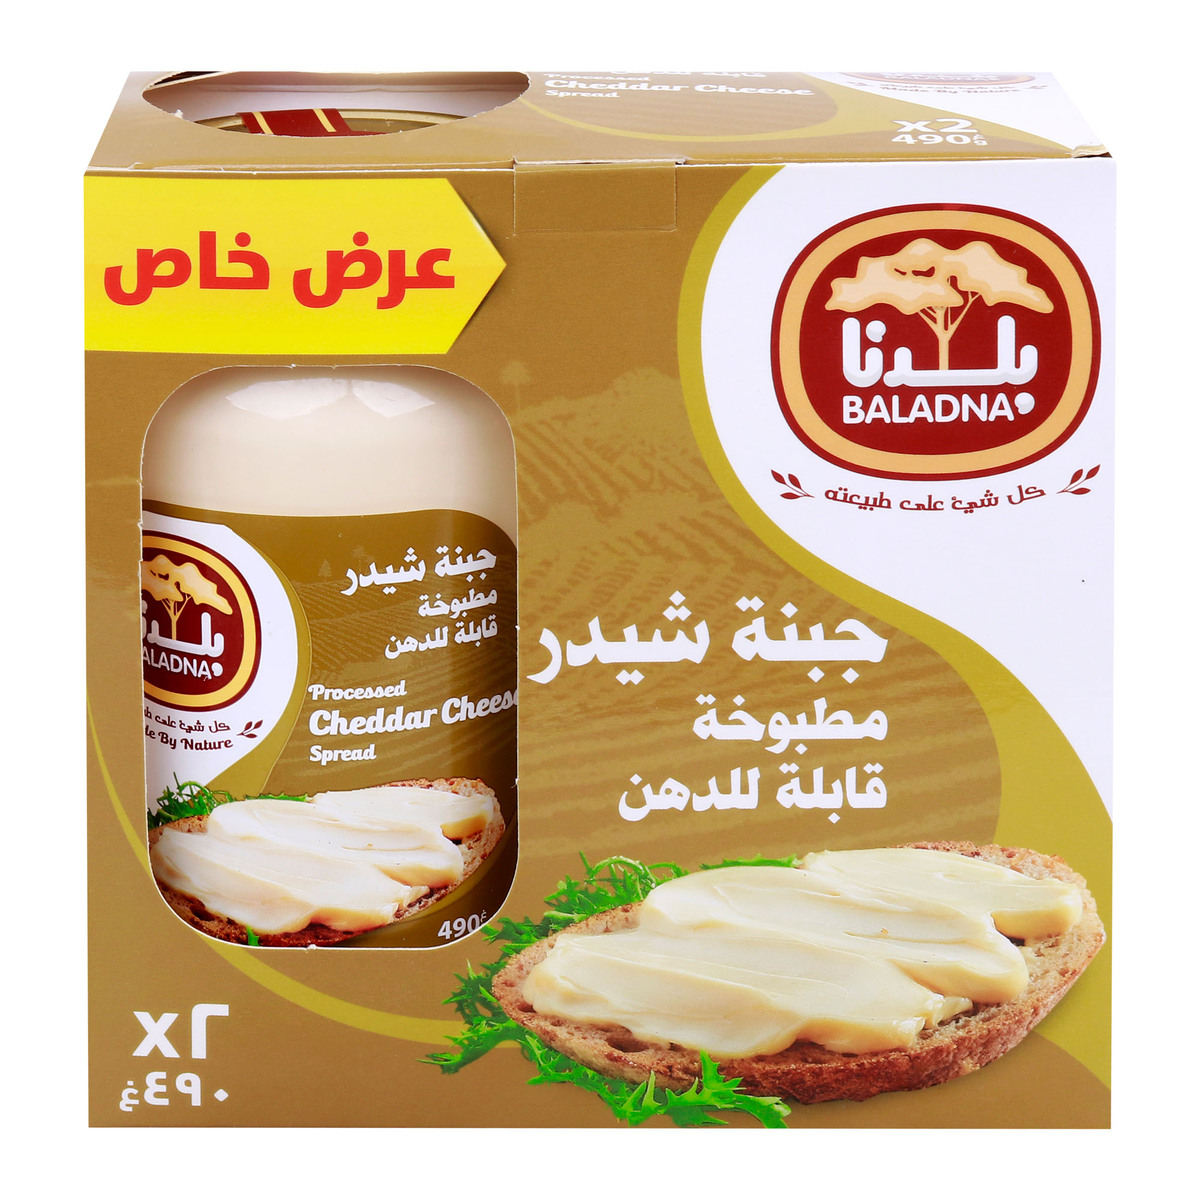 Baladna Processed Cheddar Cheese Spread Value Pack 2 x 490 g